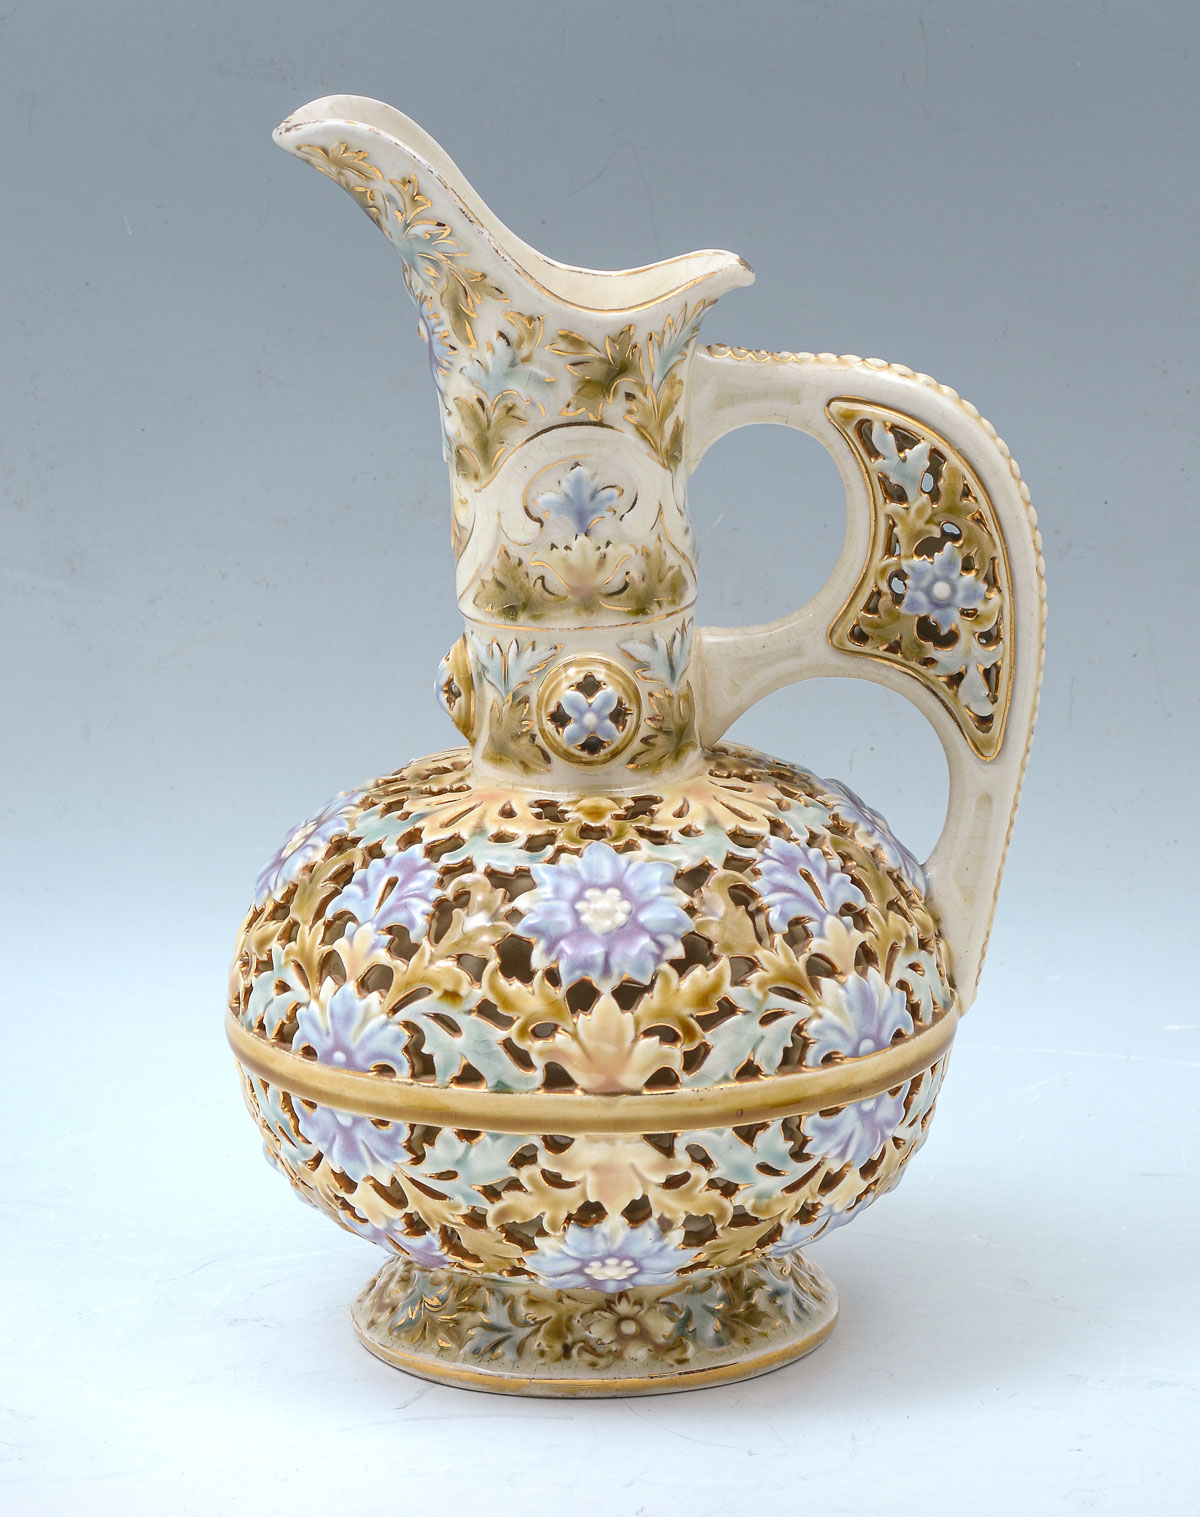 RETICULATED ZSOLNAY PITCHER: Tall